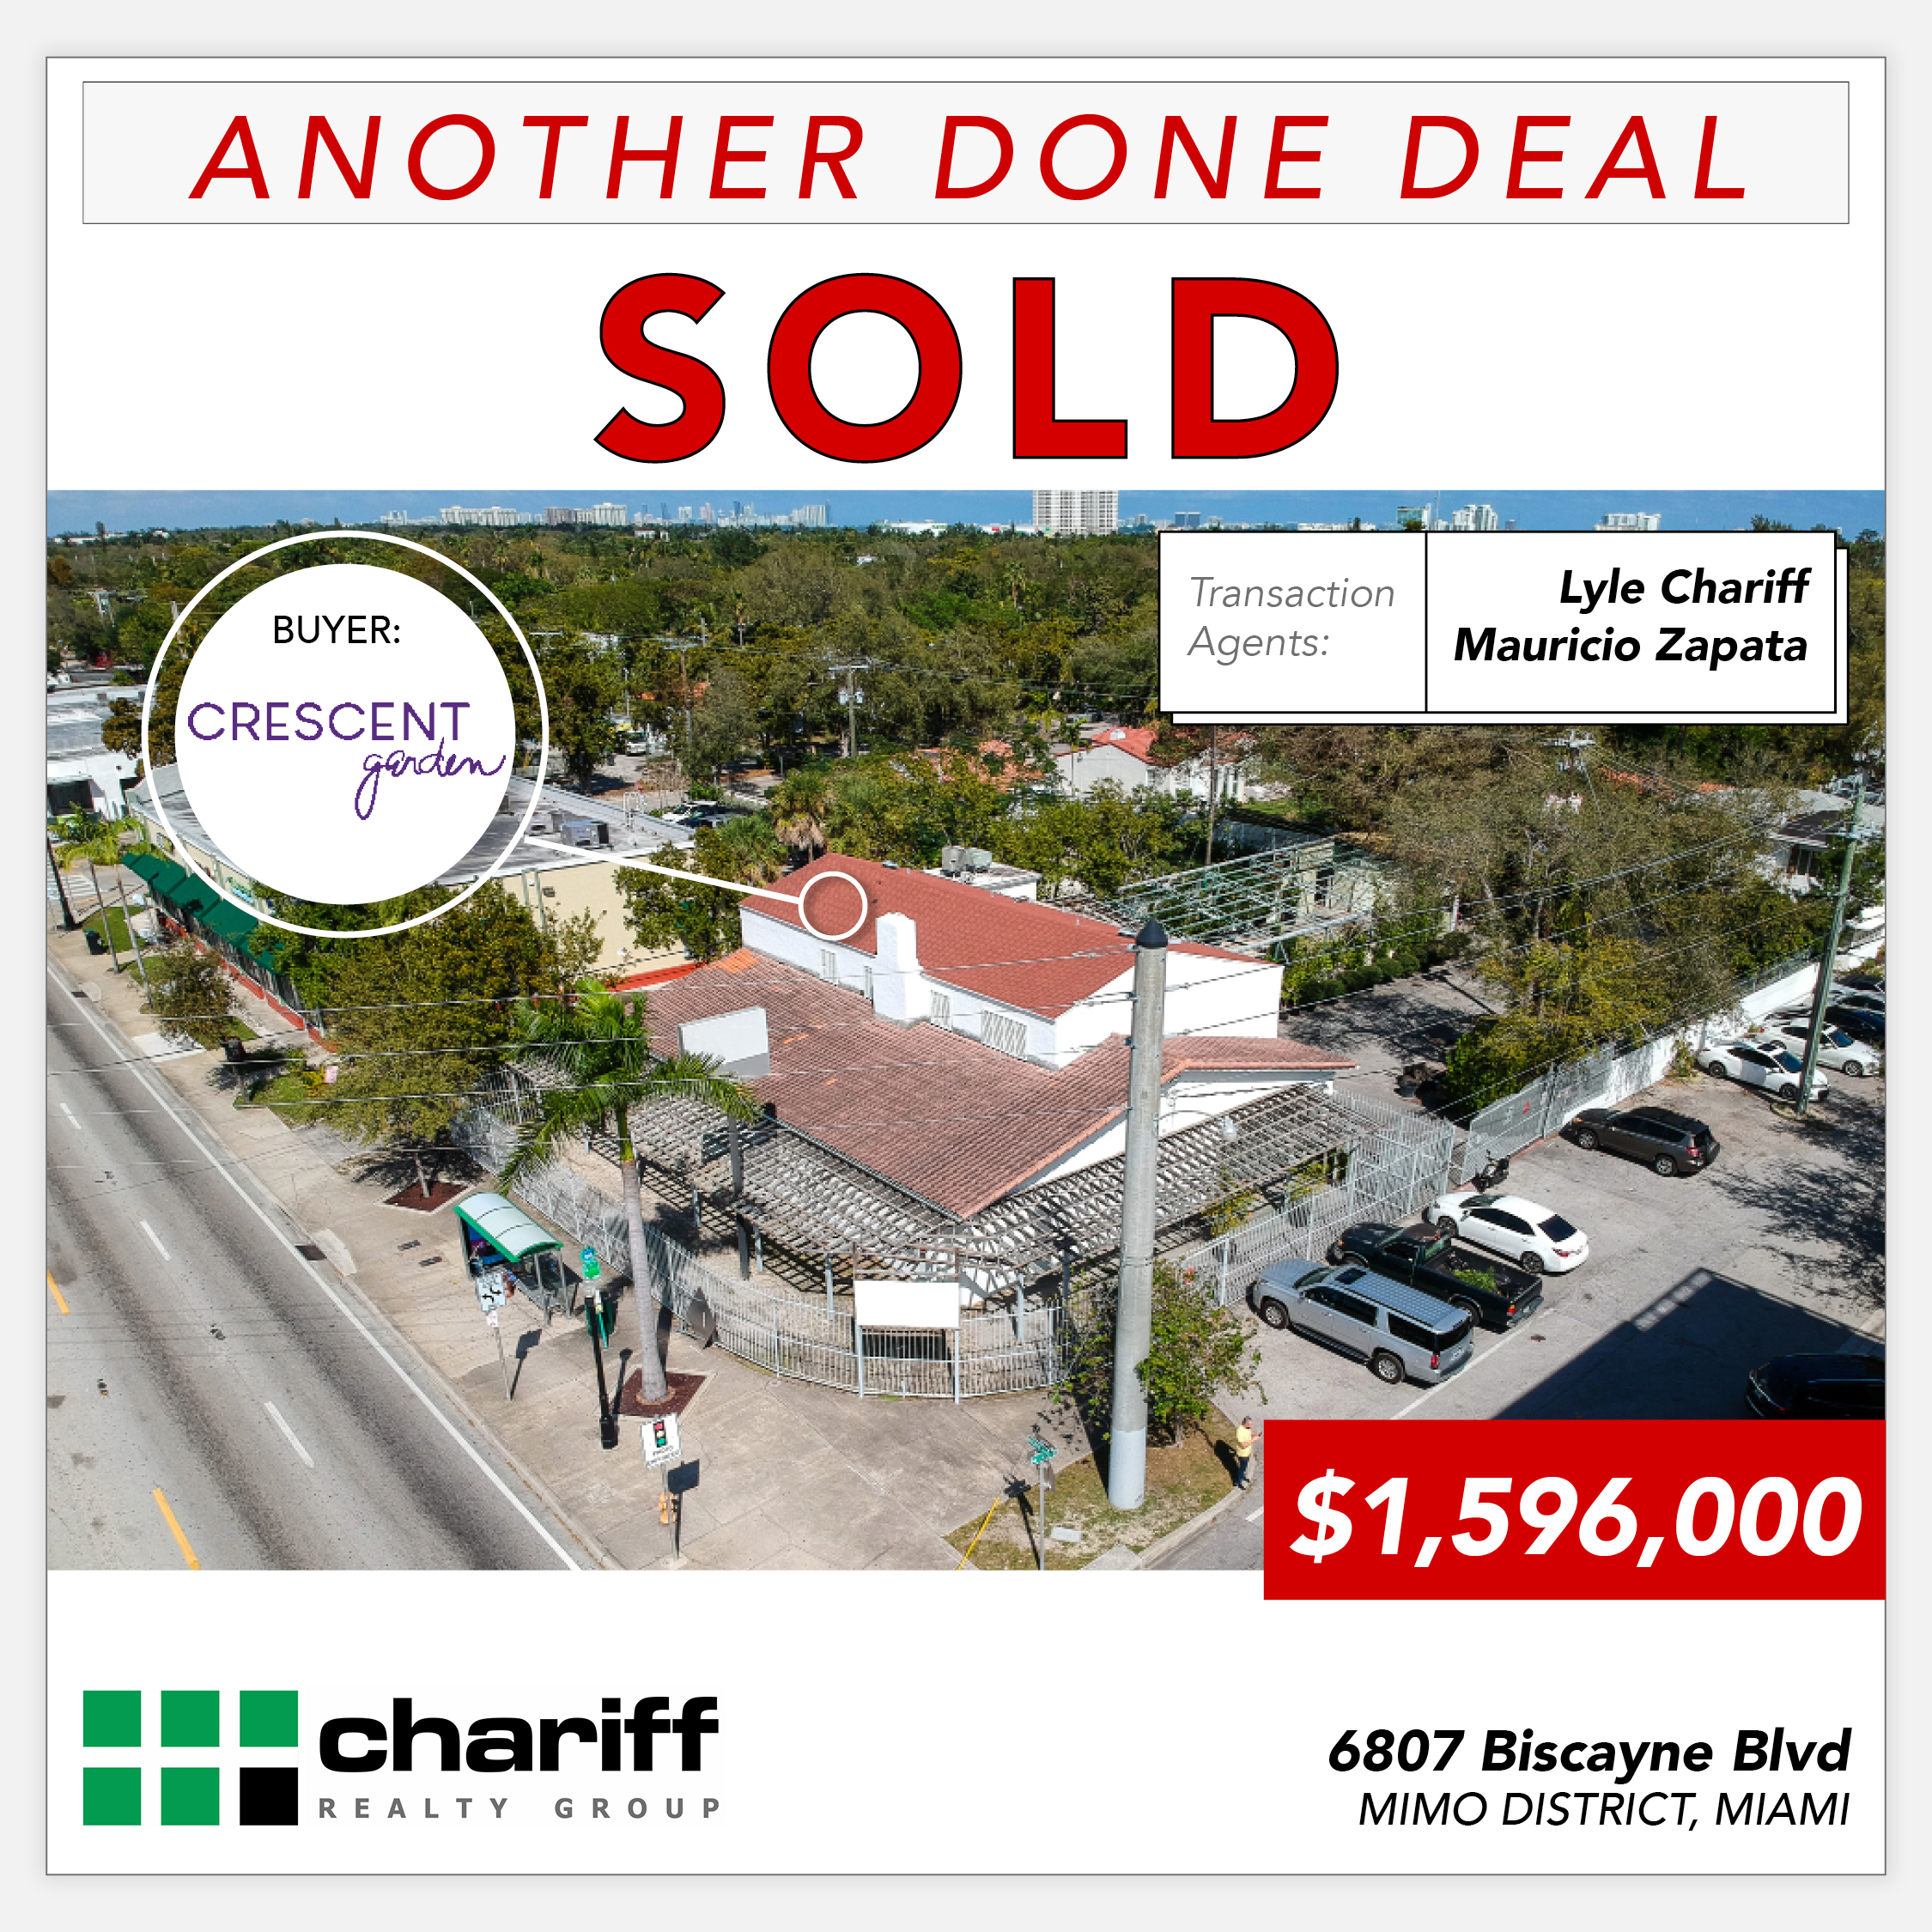 6807 Biscayne Blvd - Another Done Deal-Sold-MiMo District - Miami-Florida -33138 -Chariff Realty Group